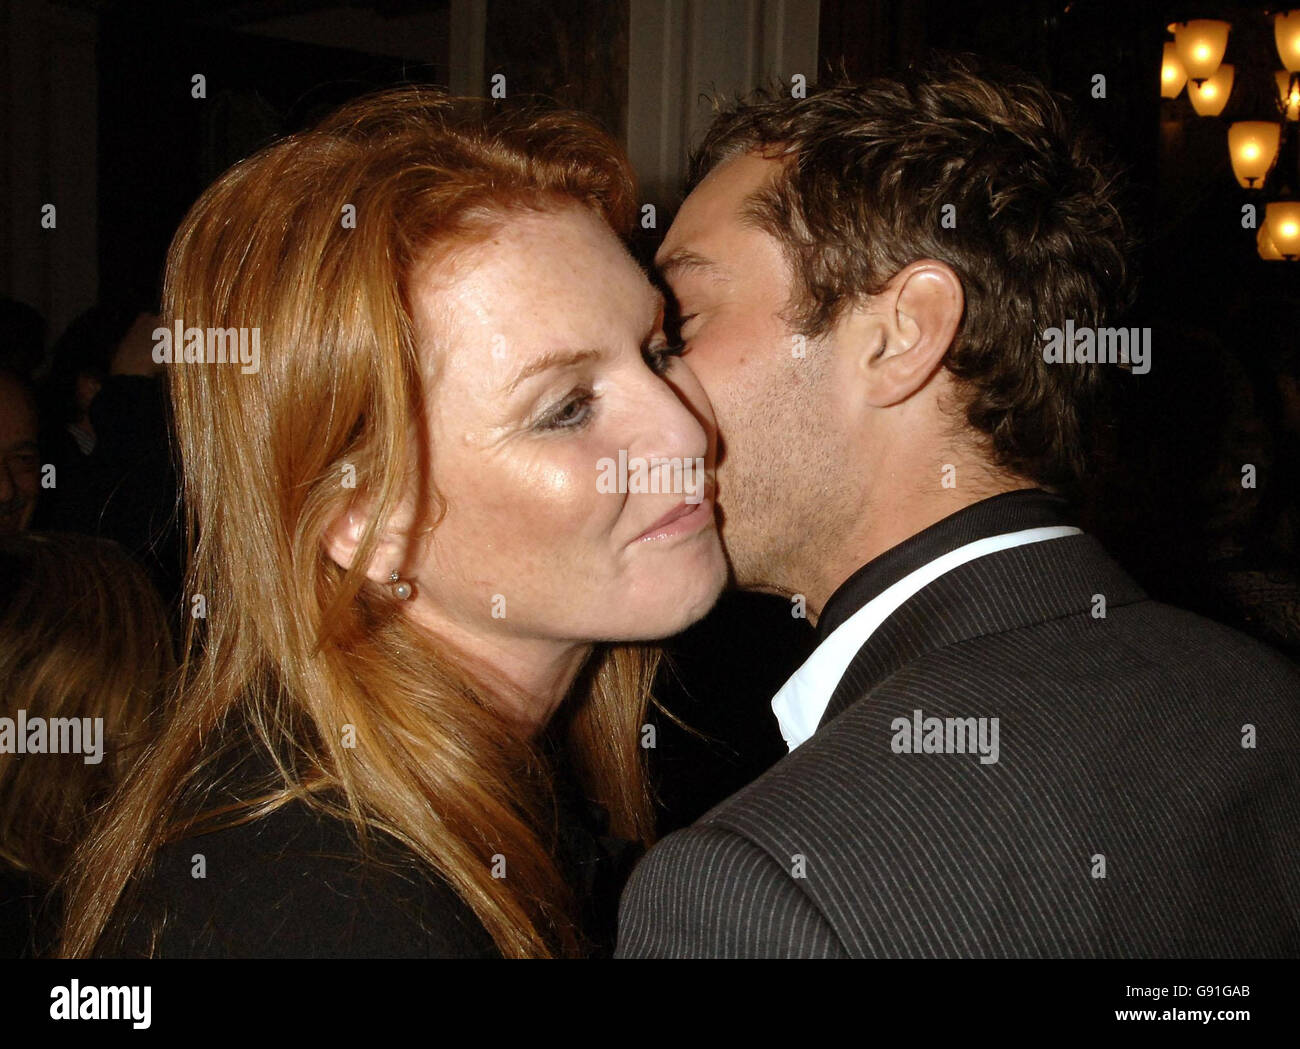 Actor Jude Law greets the Duchess of York as she arrives, Friday 25 November 2005 at the London Coliseum for Anthony Minghellas production of Madam Butterfly. PRESS ASSOCIATION Photo. Photo credit should read:John Stillwell/PA Stock Photo